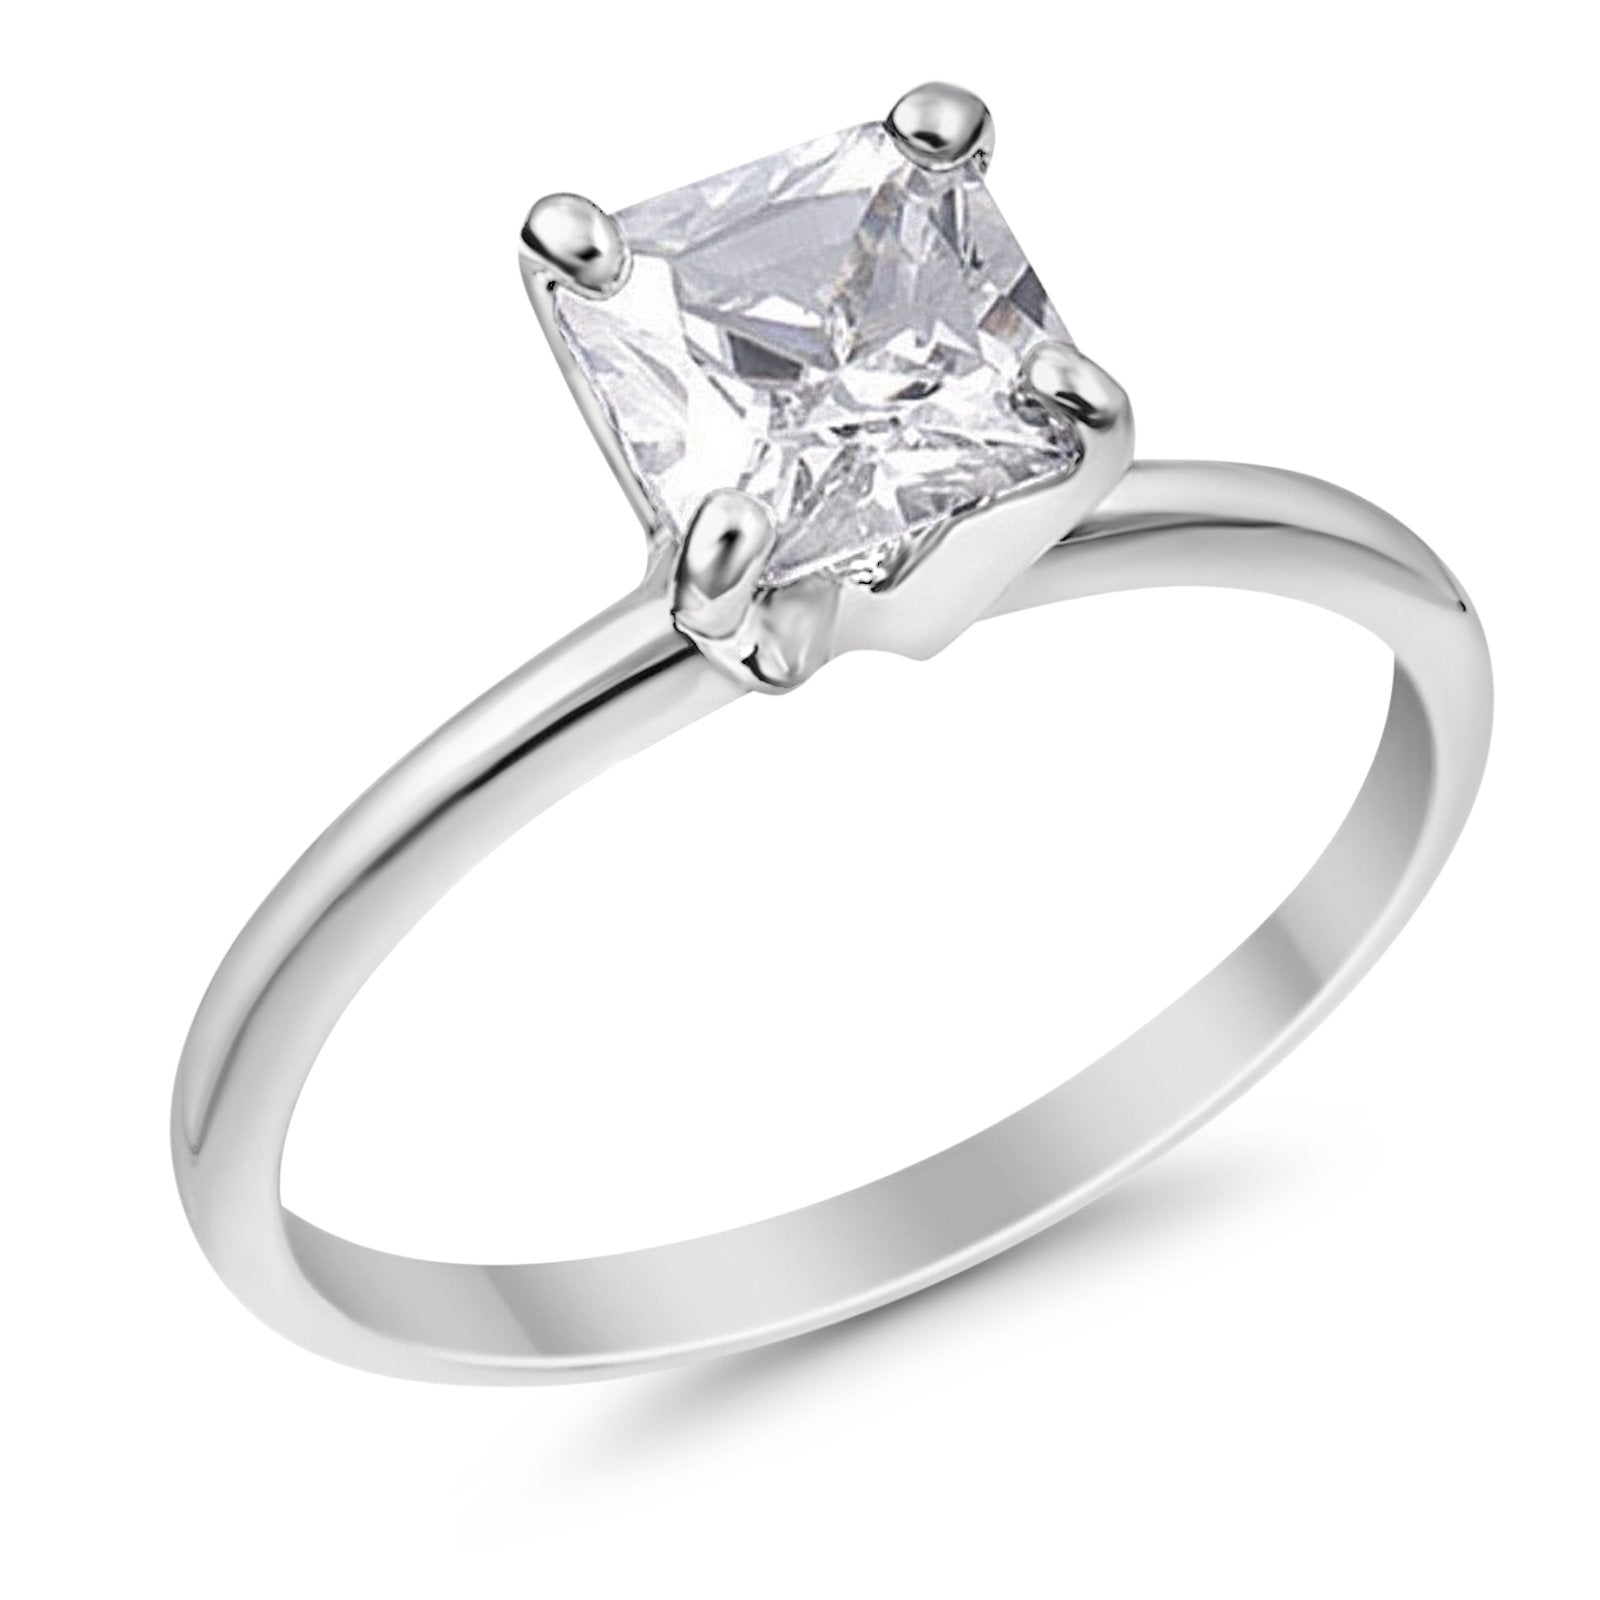 Solitaire Wedding Ring Princess Cut Simulated CZ 925 Sterling Silver